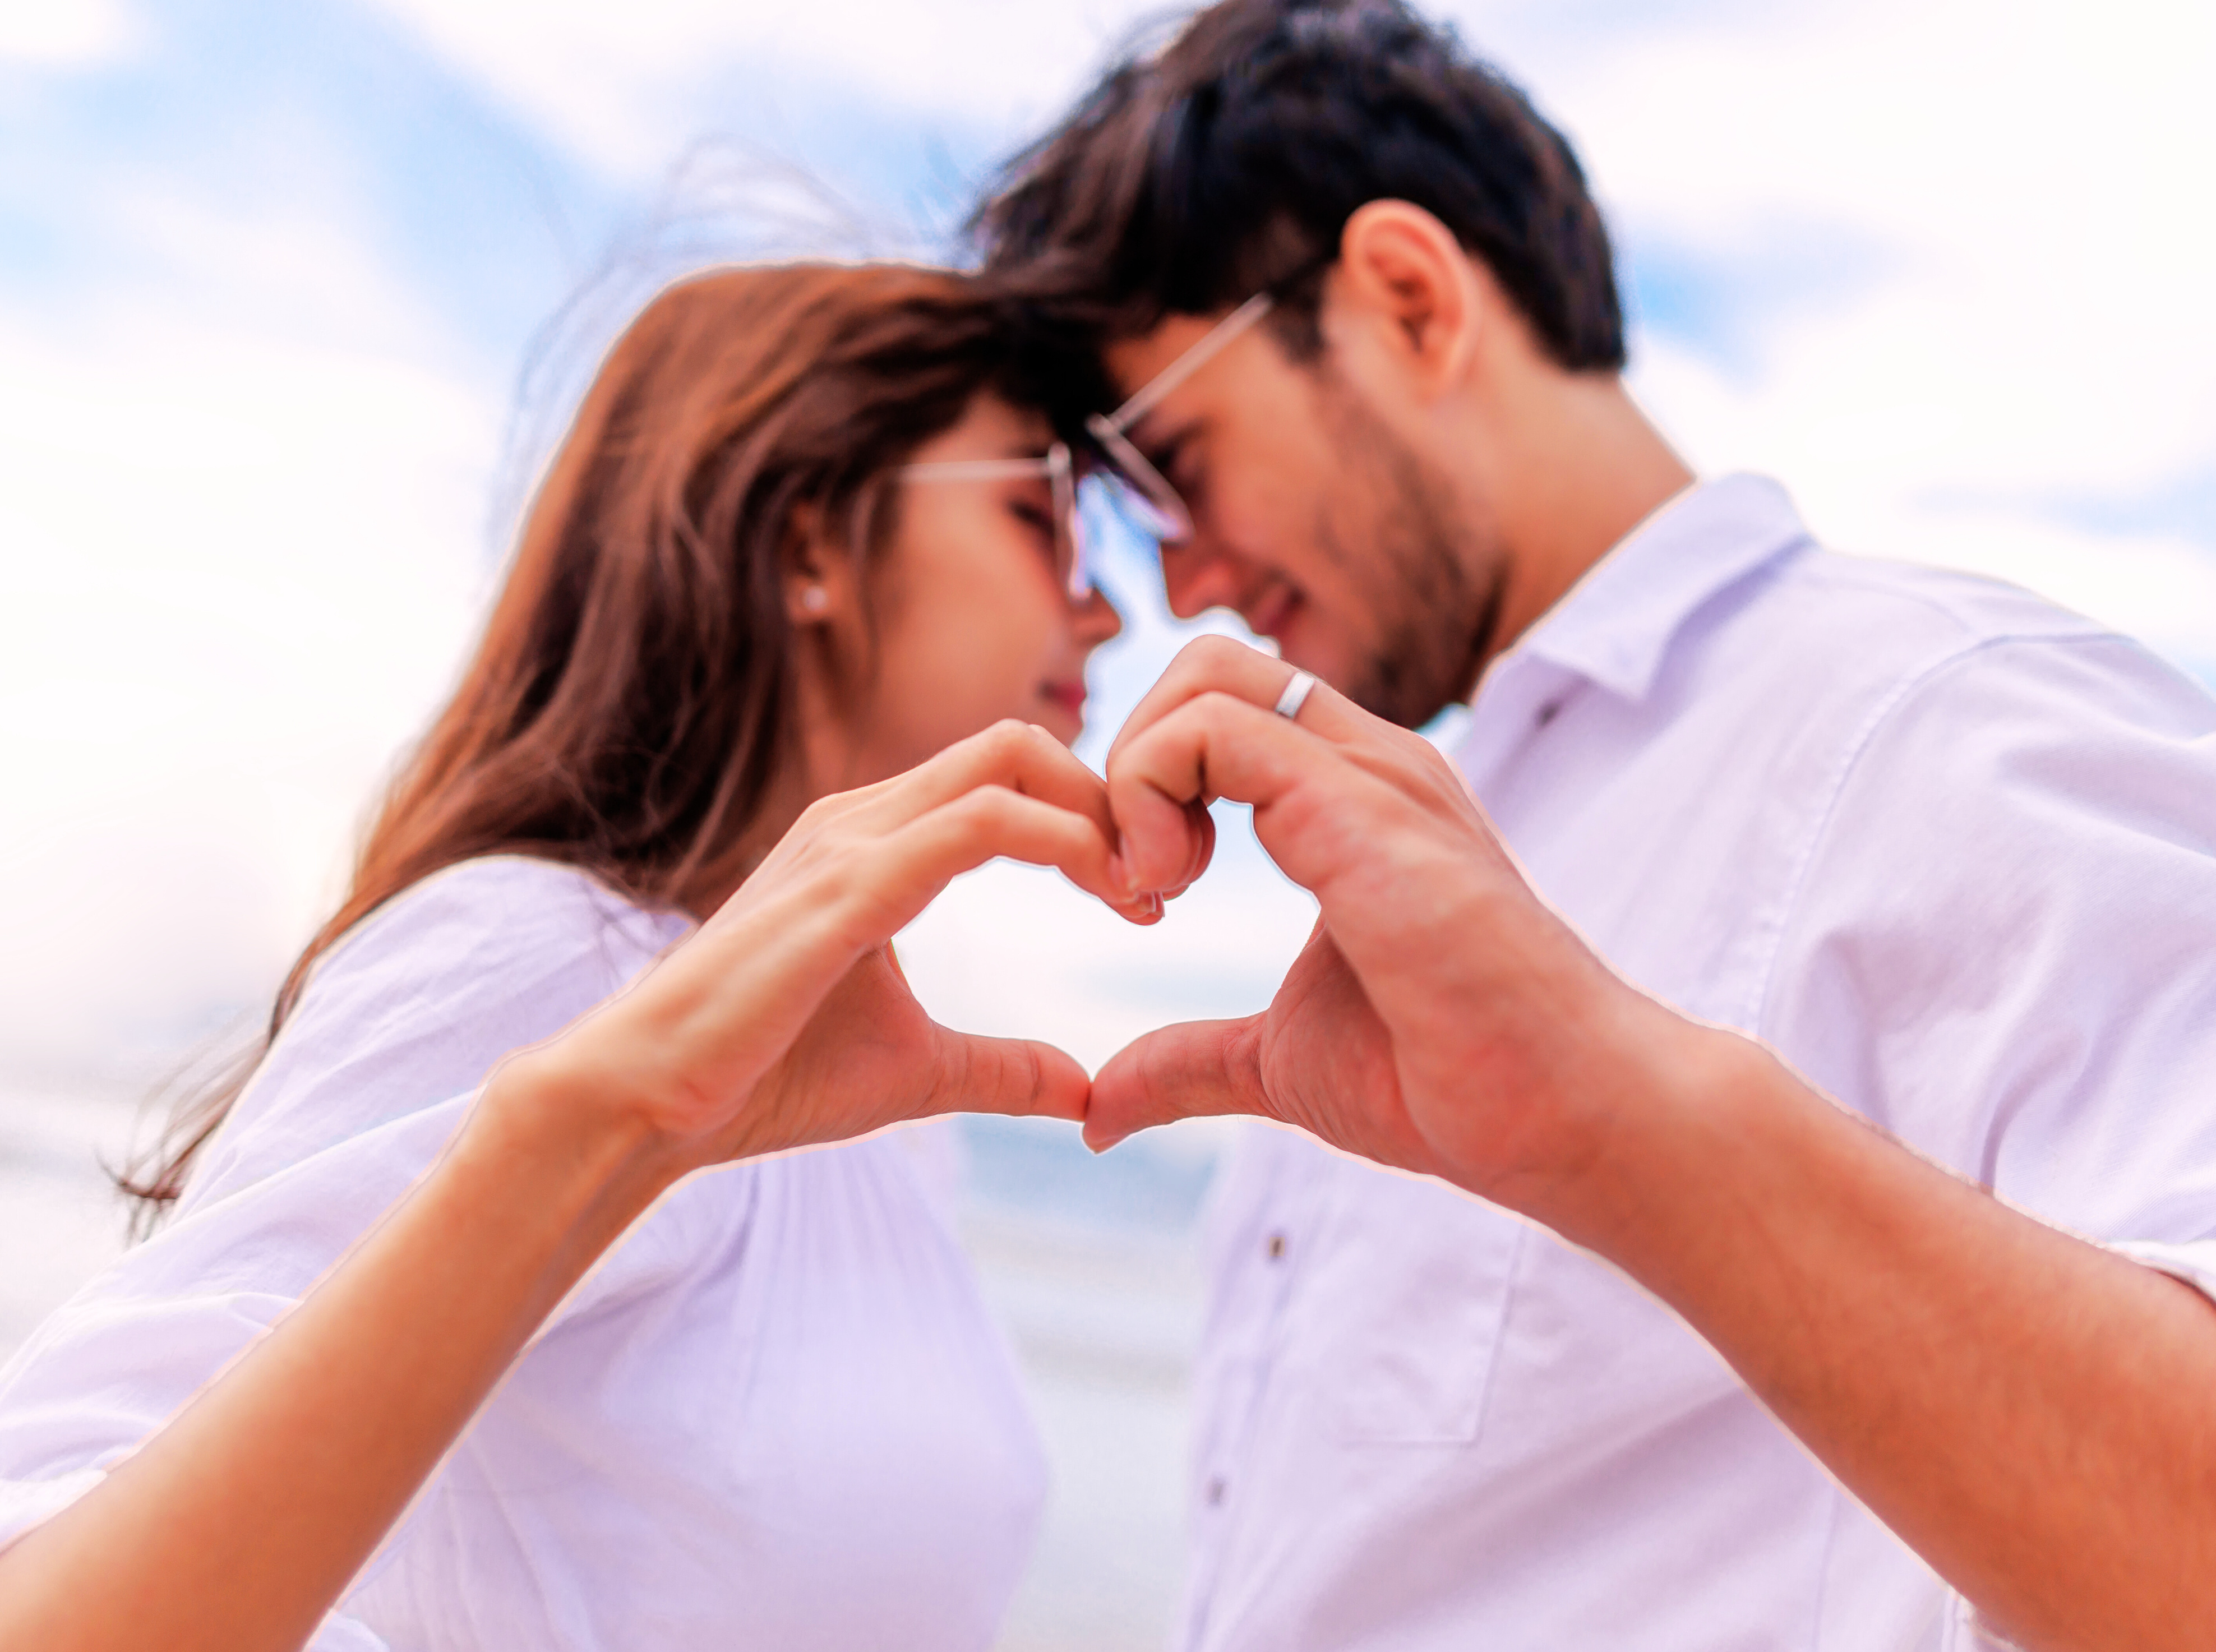 Couple Making Heart Shape with Hands